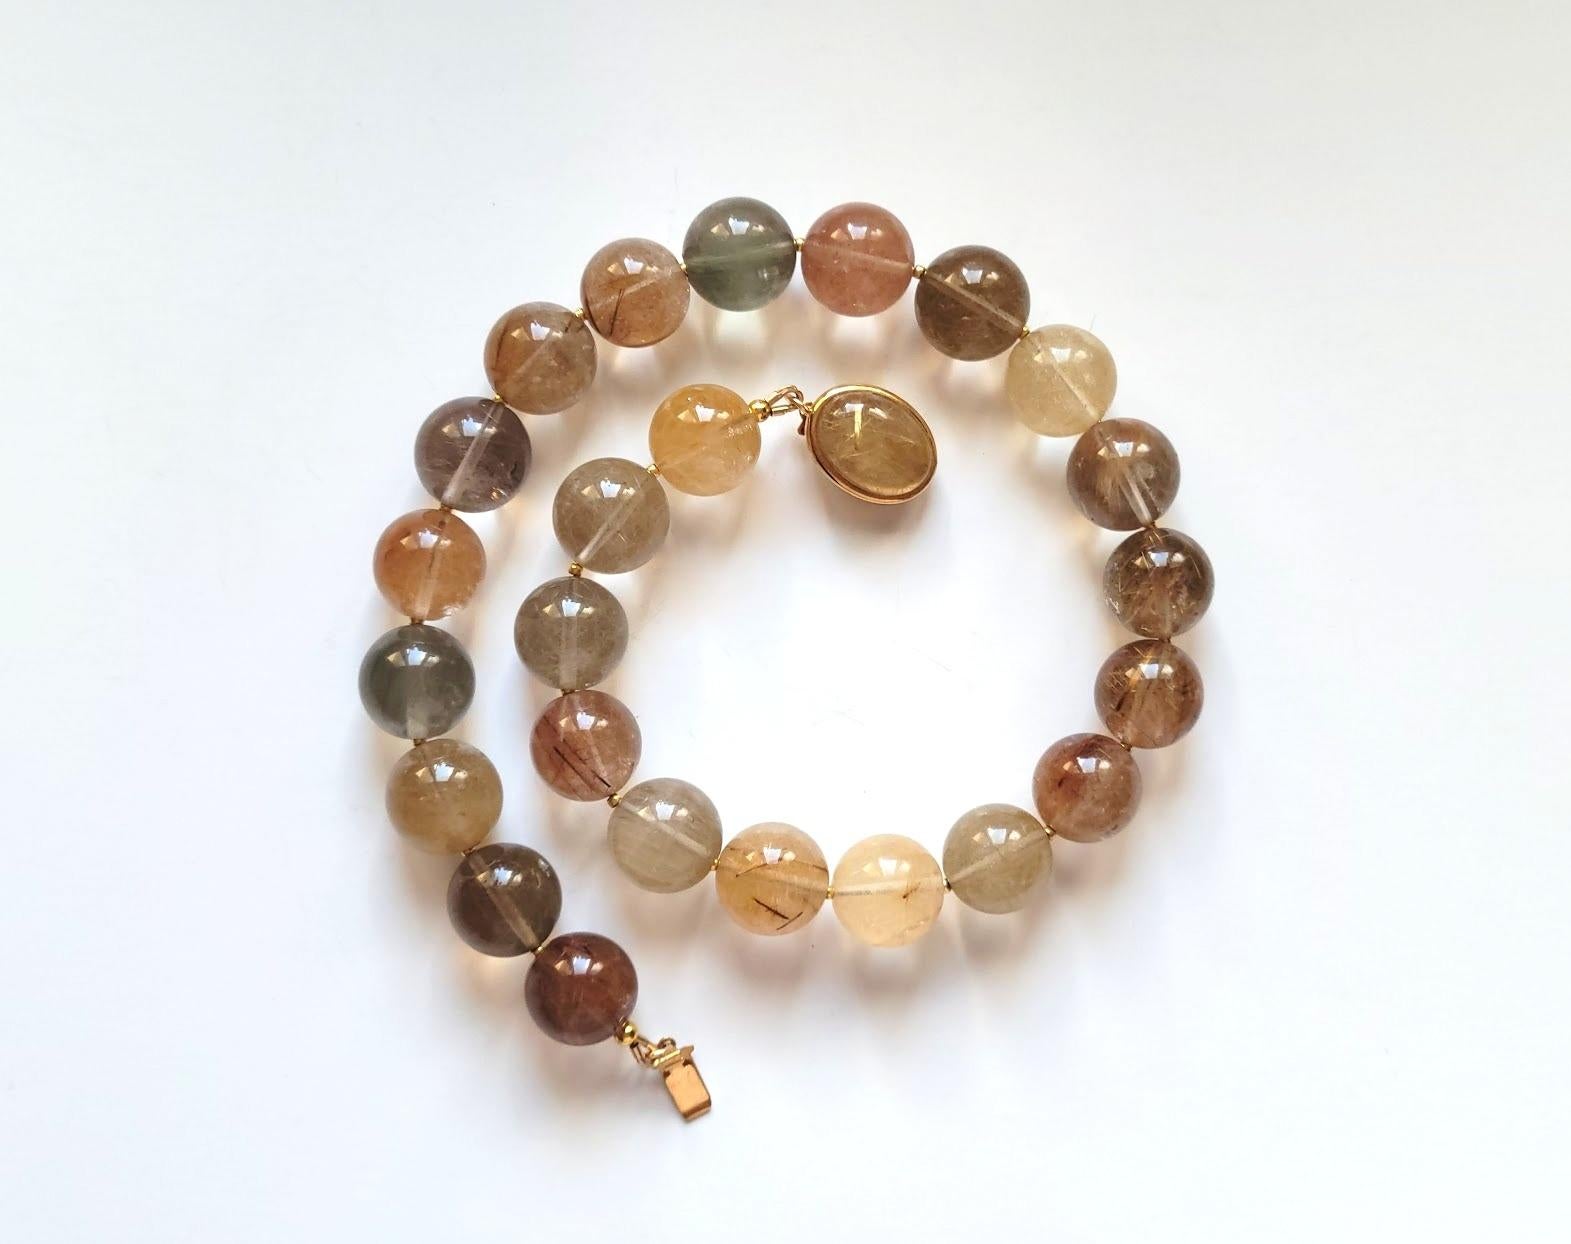 We are excited to present our newest addition to the collection - a stunning Rutilated Quartz necklace. Measuring 17.5 inches (44.5 cm) in length, this necklace is made of smooth round beads (16.5mm) in a rich reddish-brown, caramel, gold, and silky